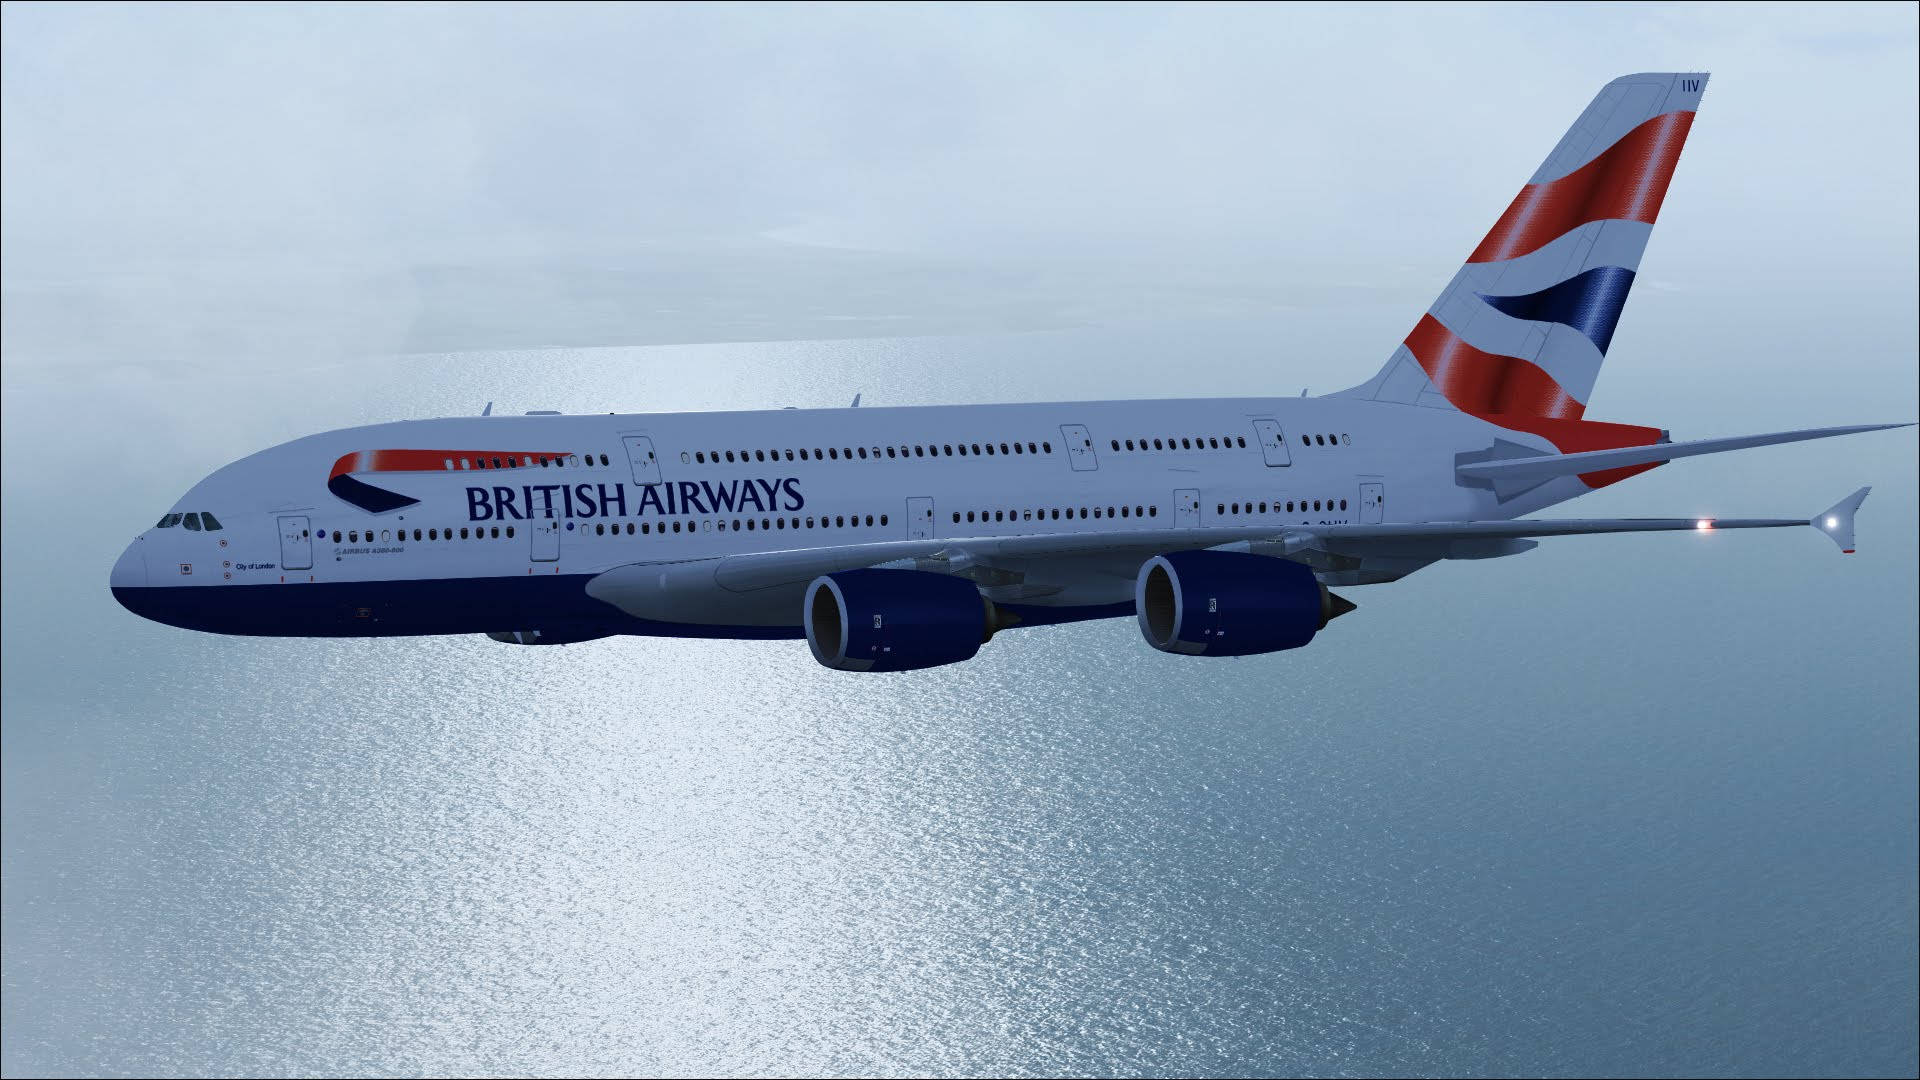 Airbus A380 From British Airways Flying Above Sea Wallpaper